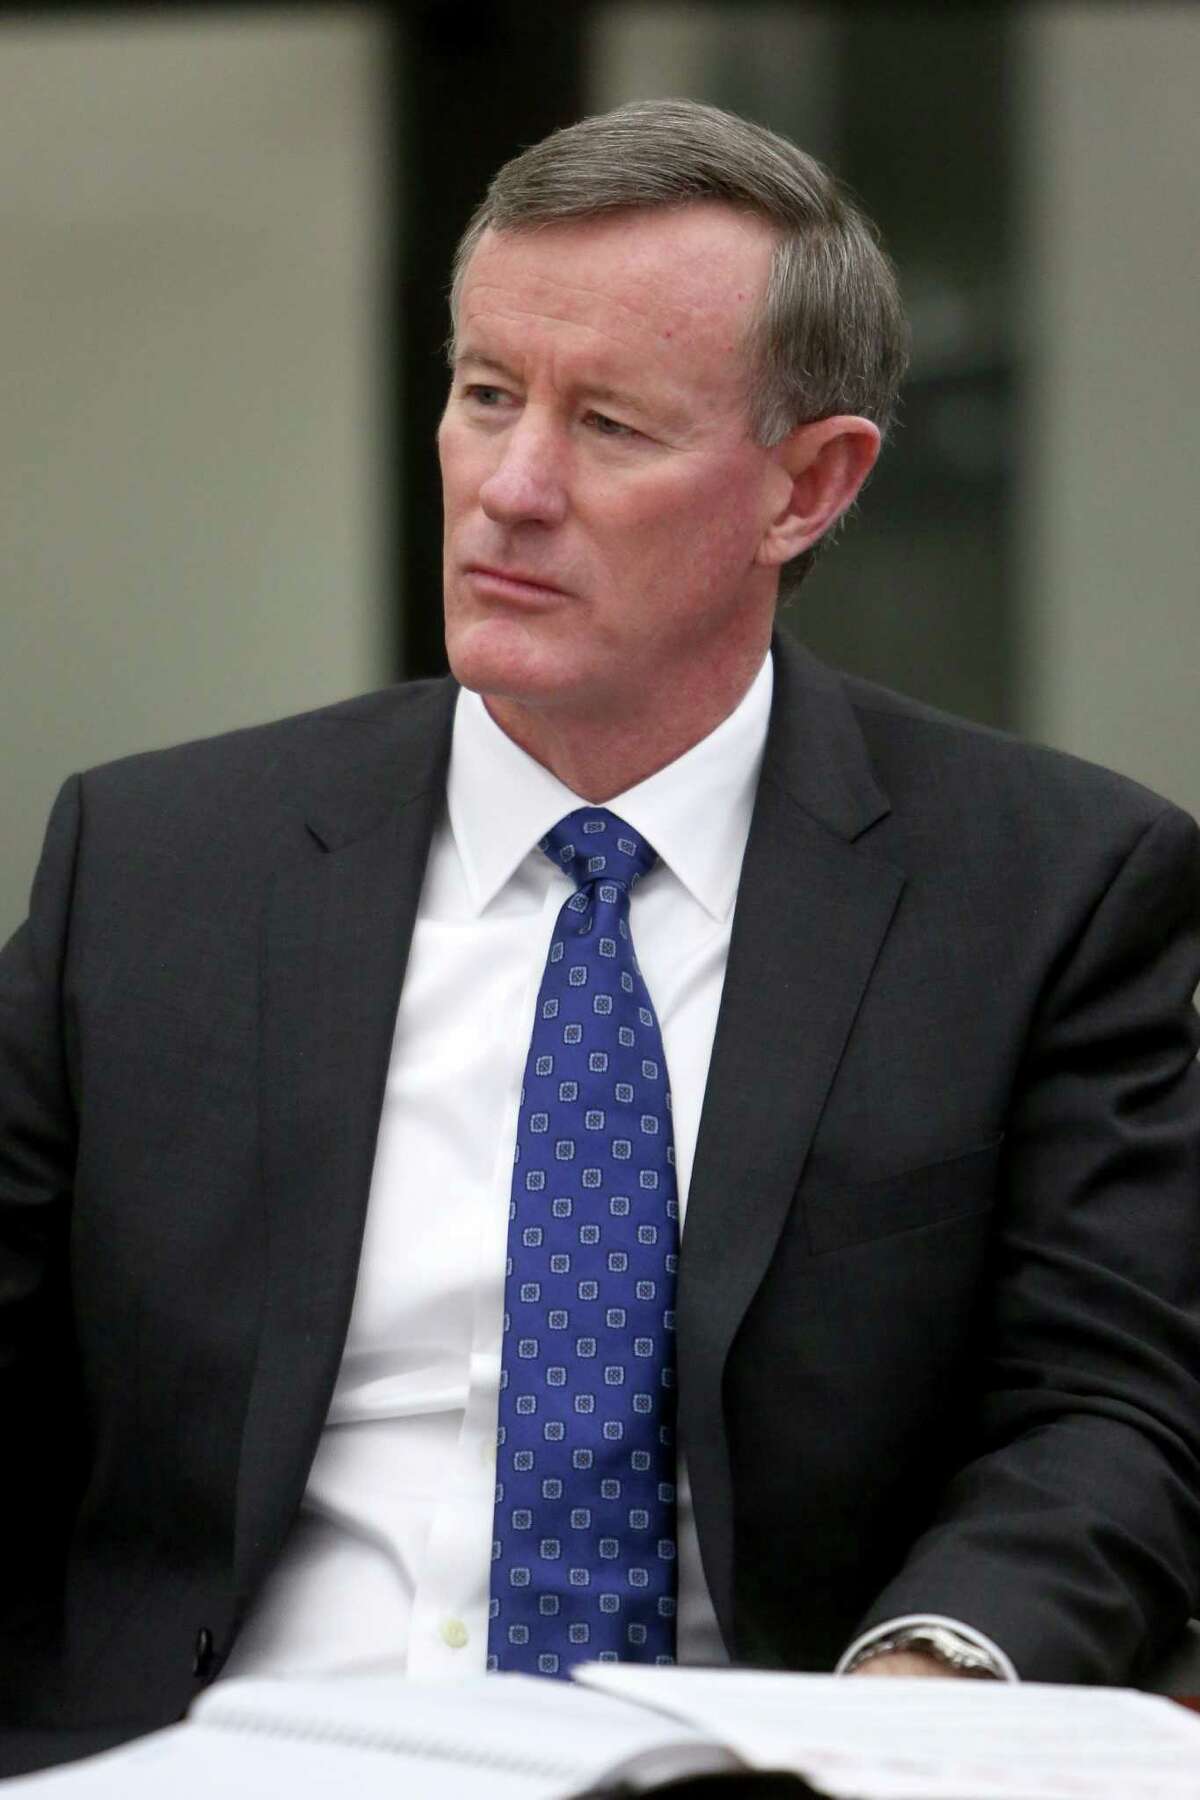 William McRaven, University of Texas, a chancellor of Texas' public university systems meets with the Chronicle's editorial board at the Houston Chronicle Monday, Jan. 12, 2015, in Houston, Texas. ( Gary Coronado / Houston Chronicle )